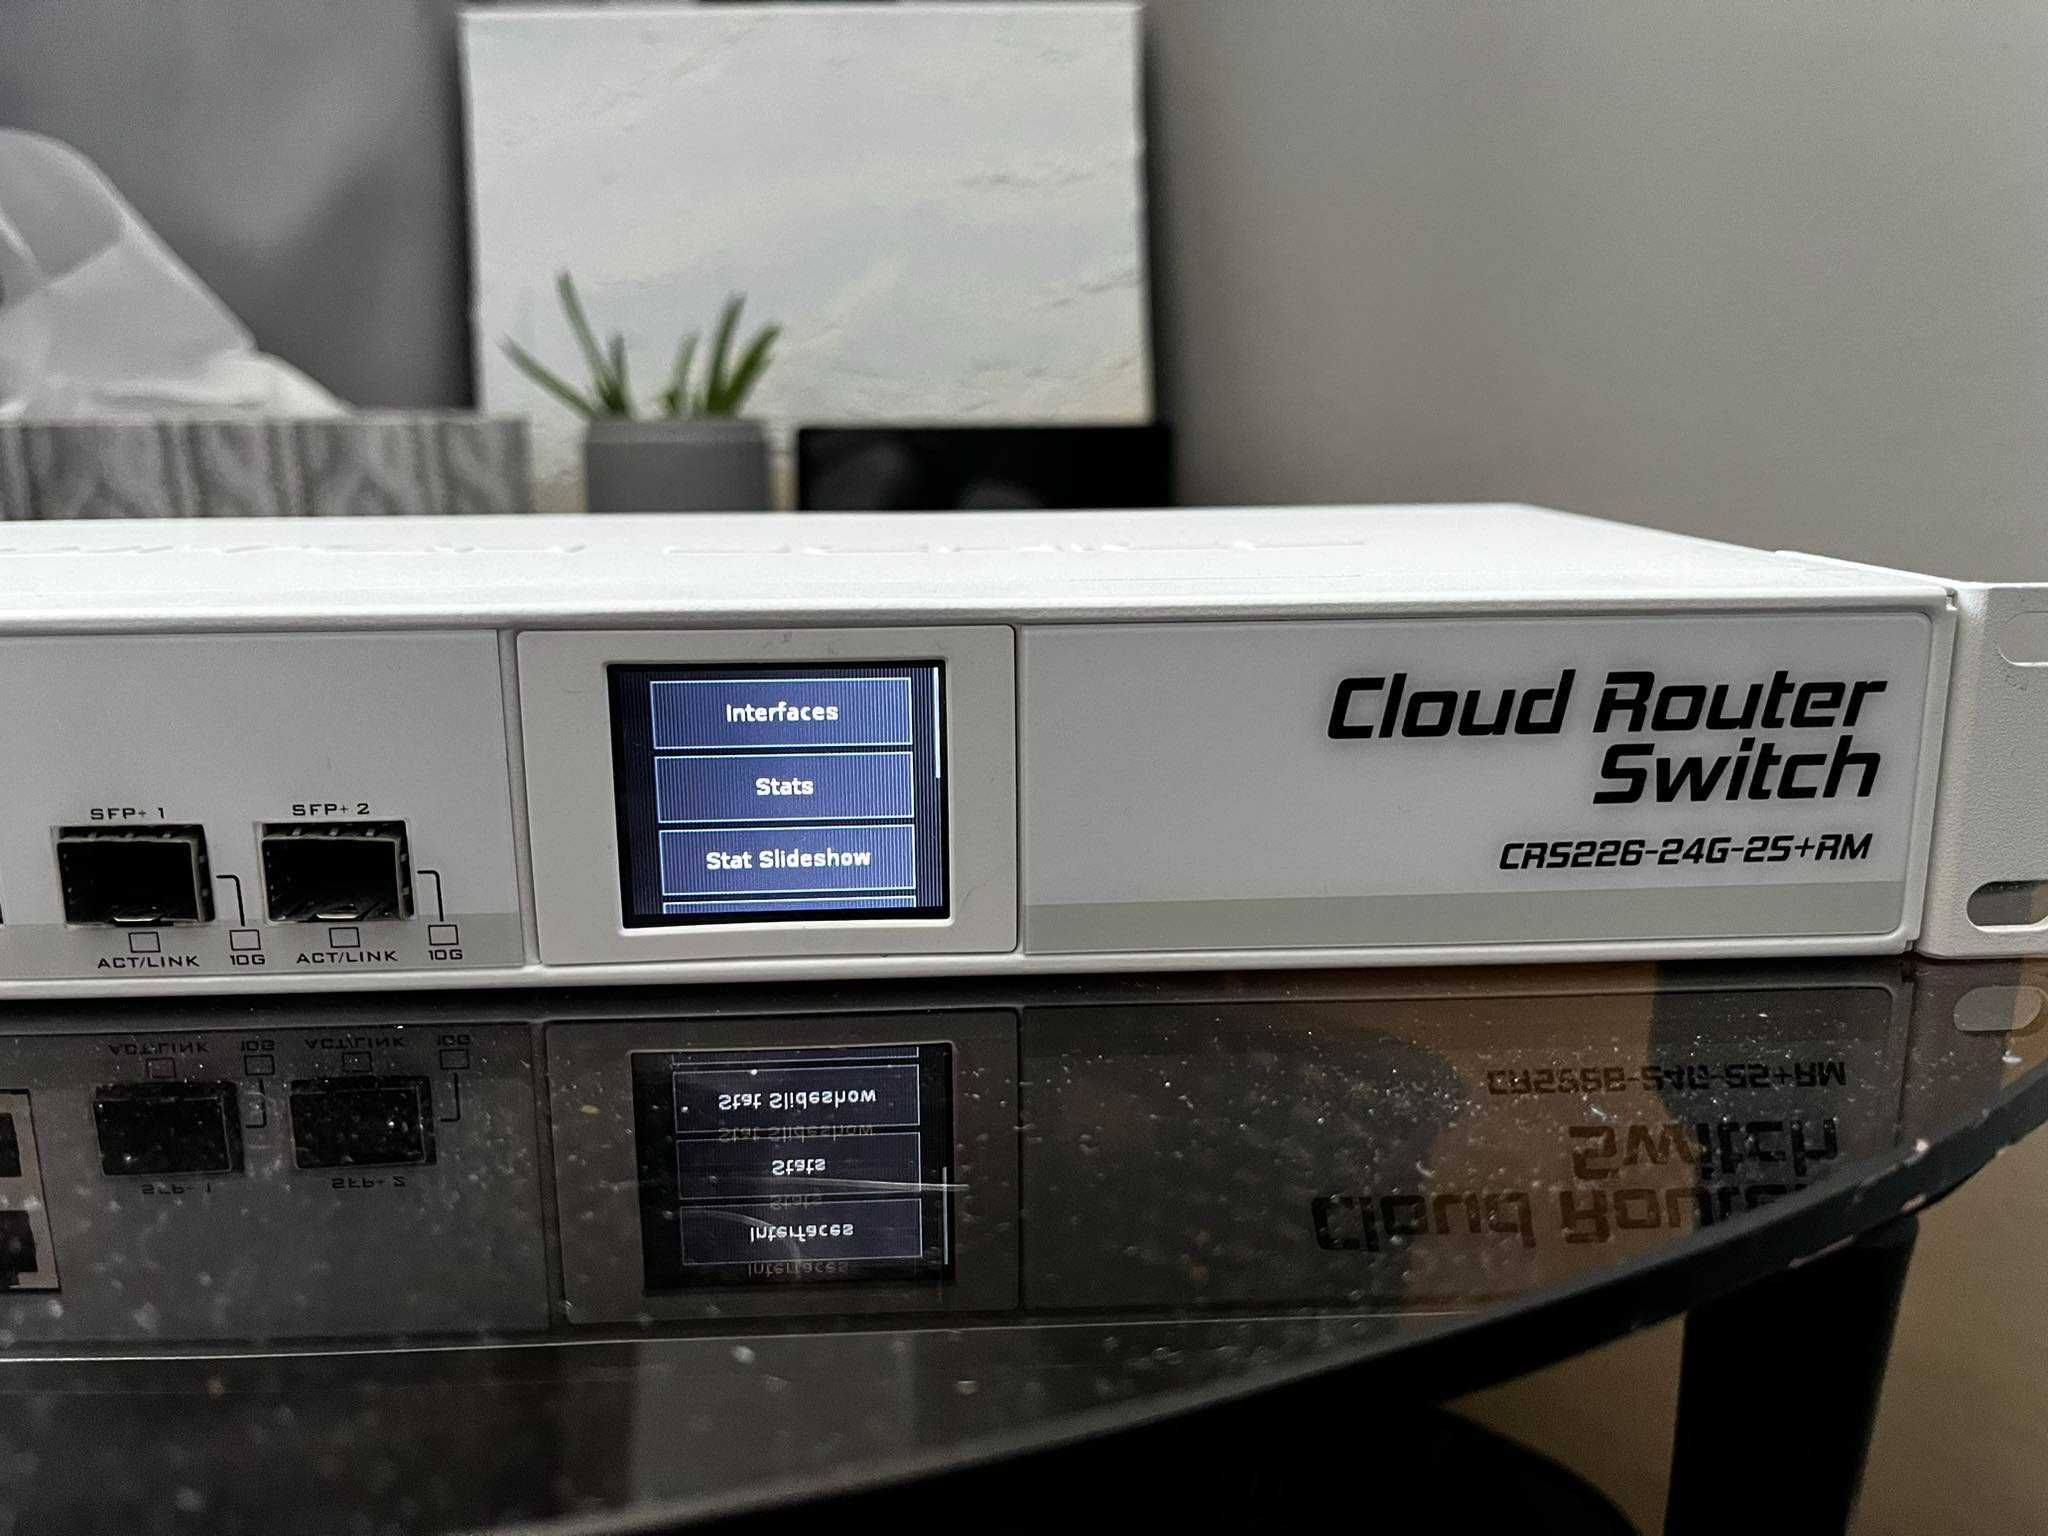 Cloud Router Switcha CRS226-24G-2S+RM